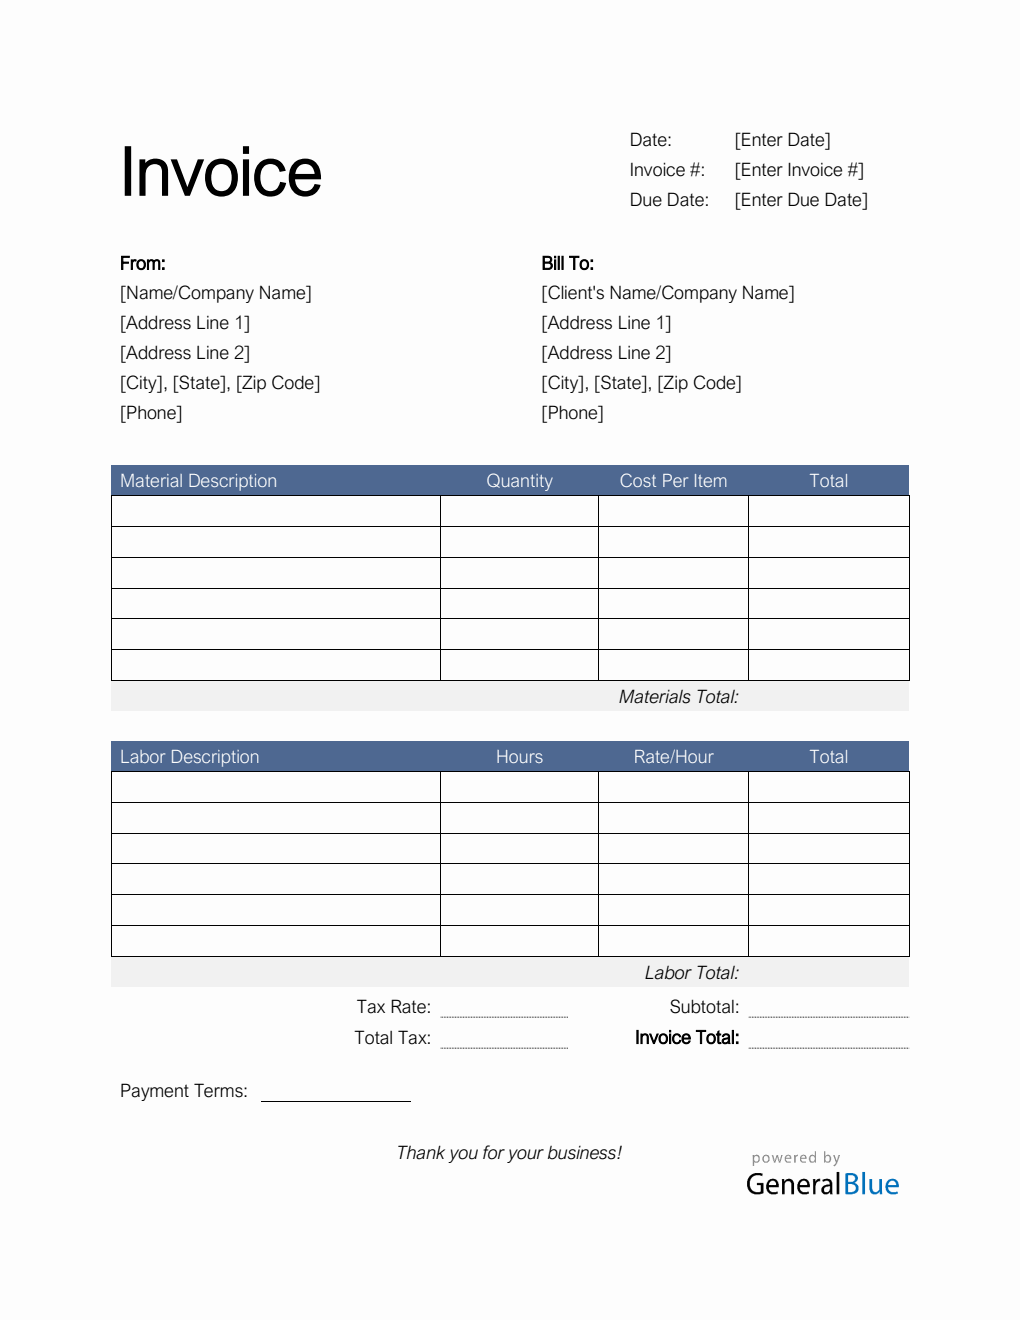 Time and Materials Invoice with Tax Calculation in Word (Colorful)